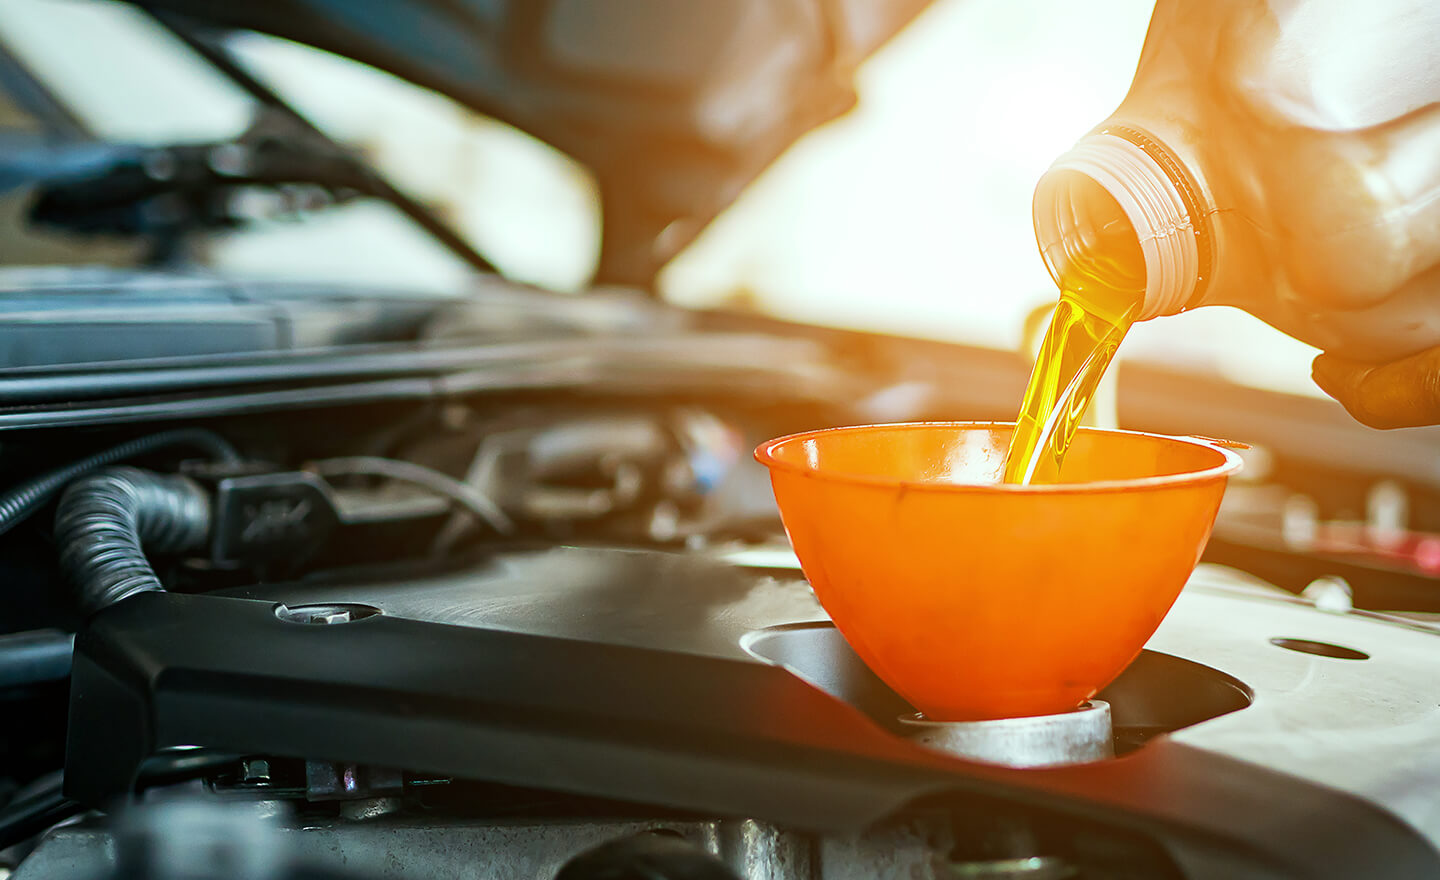 Engine Oil Essentials: What Every Motorist Needs to Know